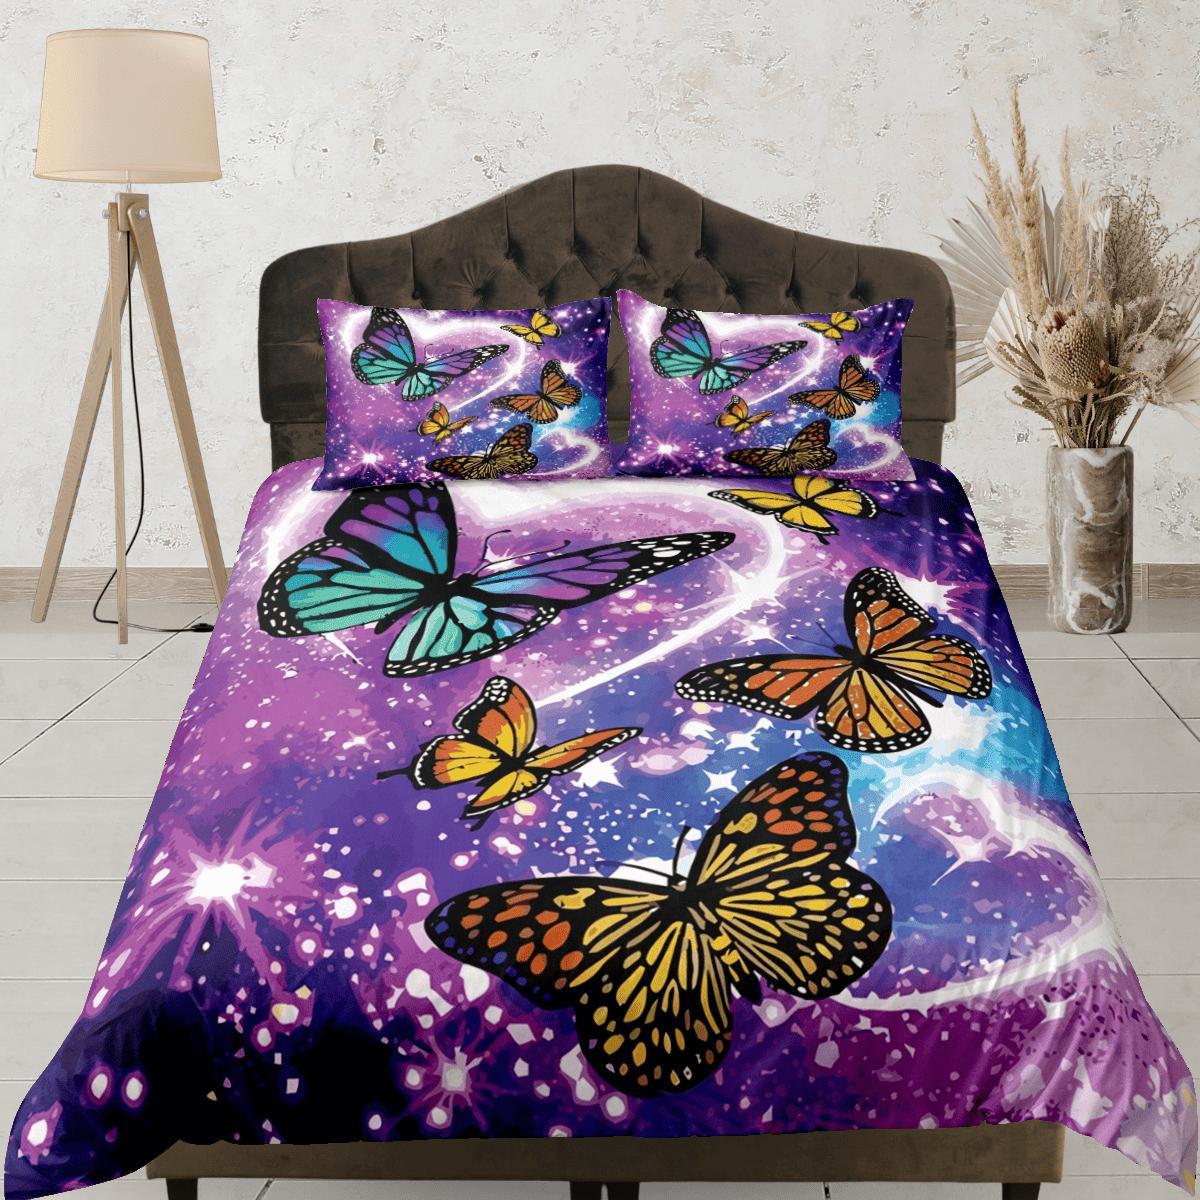 daintyduvet Butterfly Purple Duvet Cover Set Colorful Bedspread, Dorm Bedding with Pillowcase